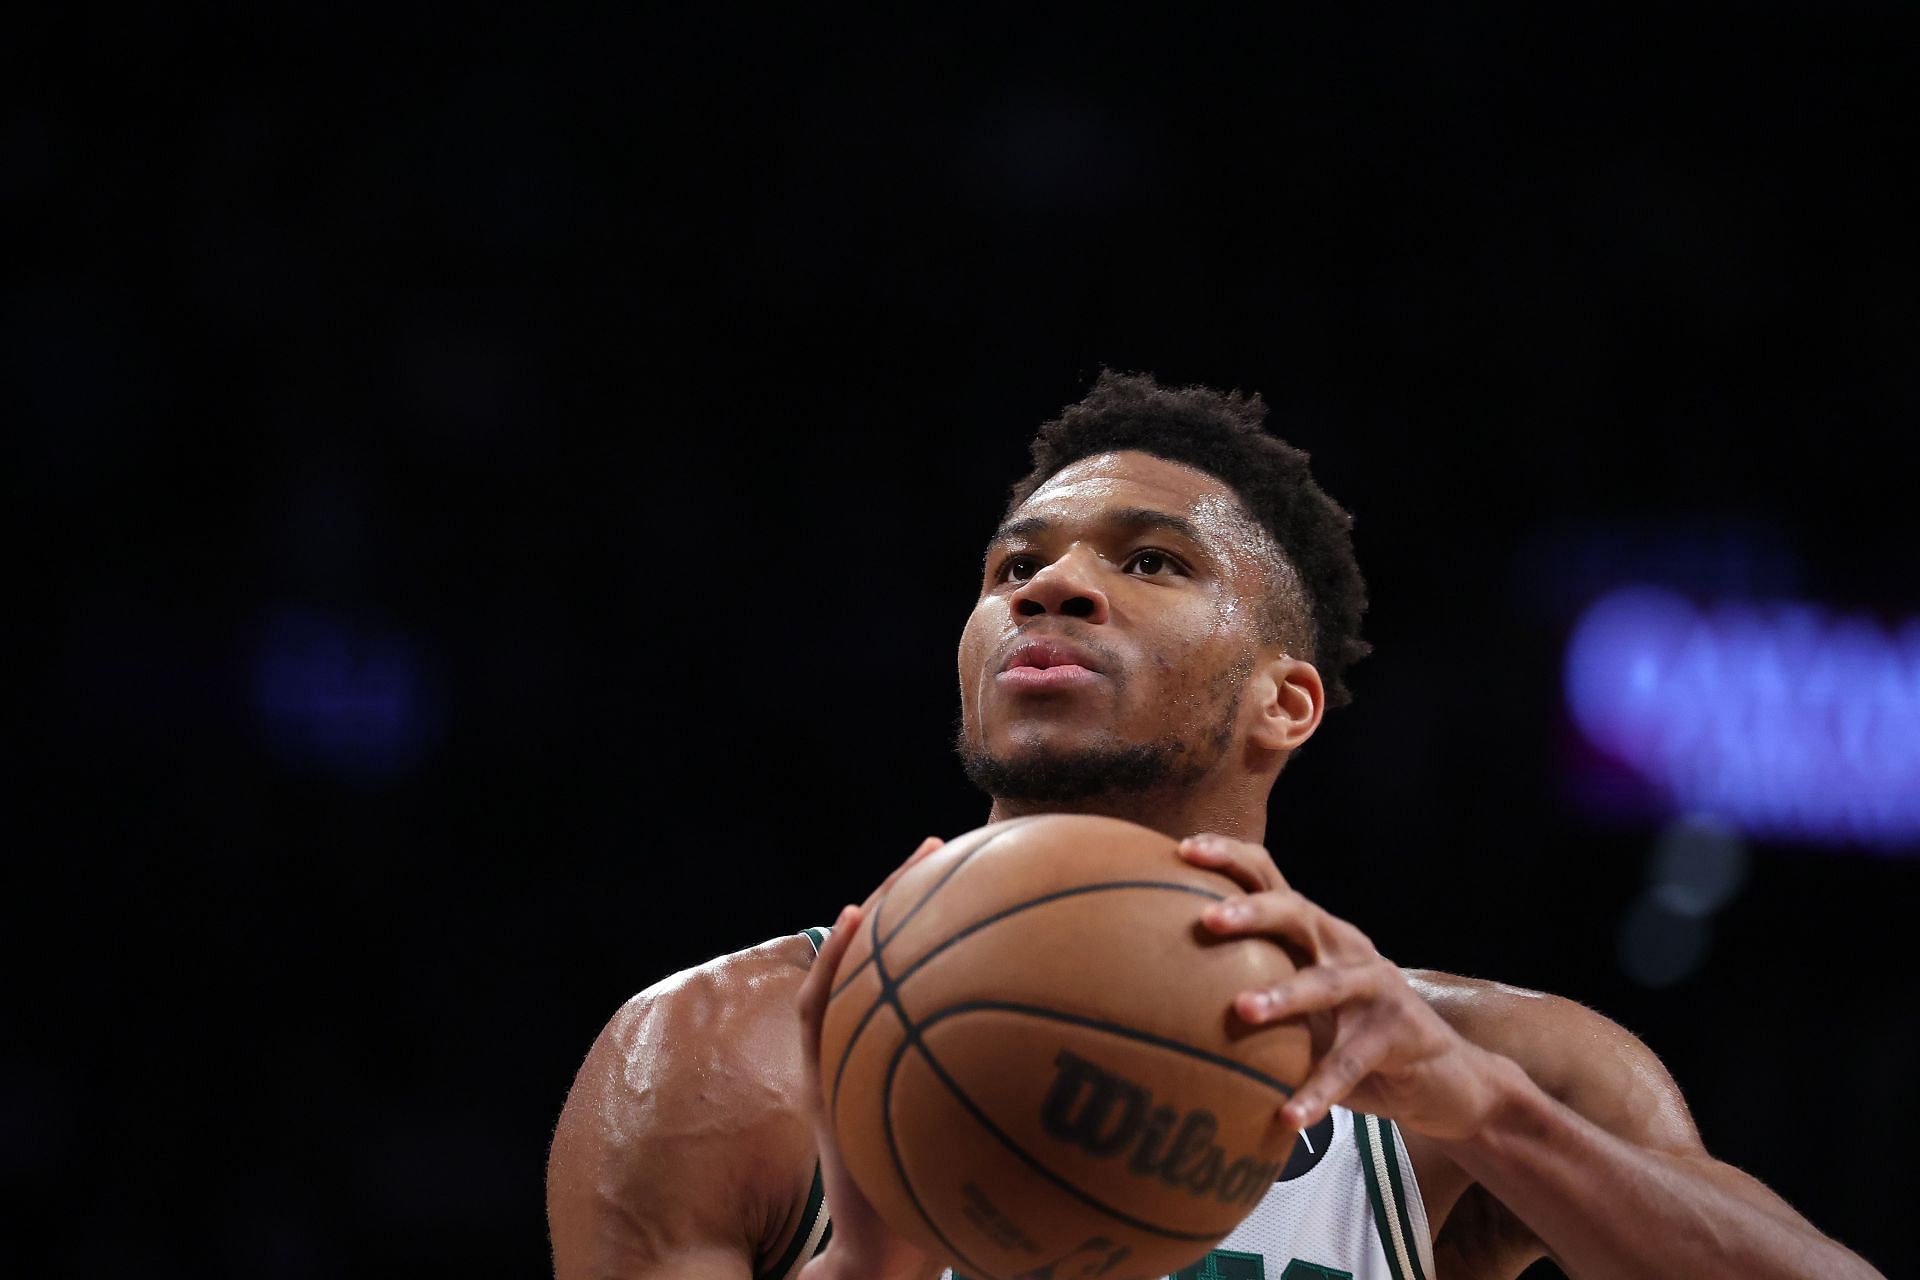 Giannis Antetokounmpo of the Milwaukee Bucks in action against the Brooklyn Nets